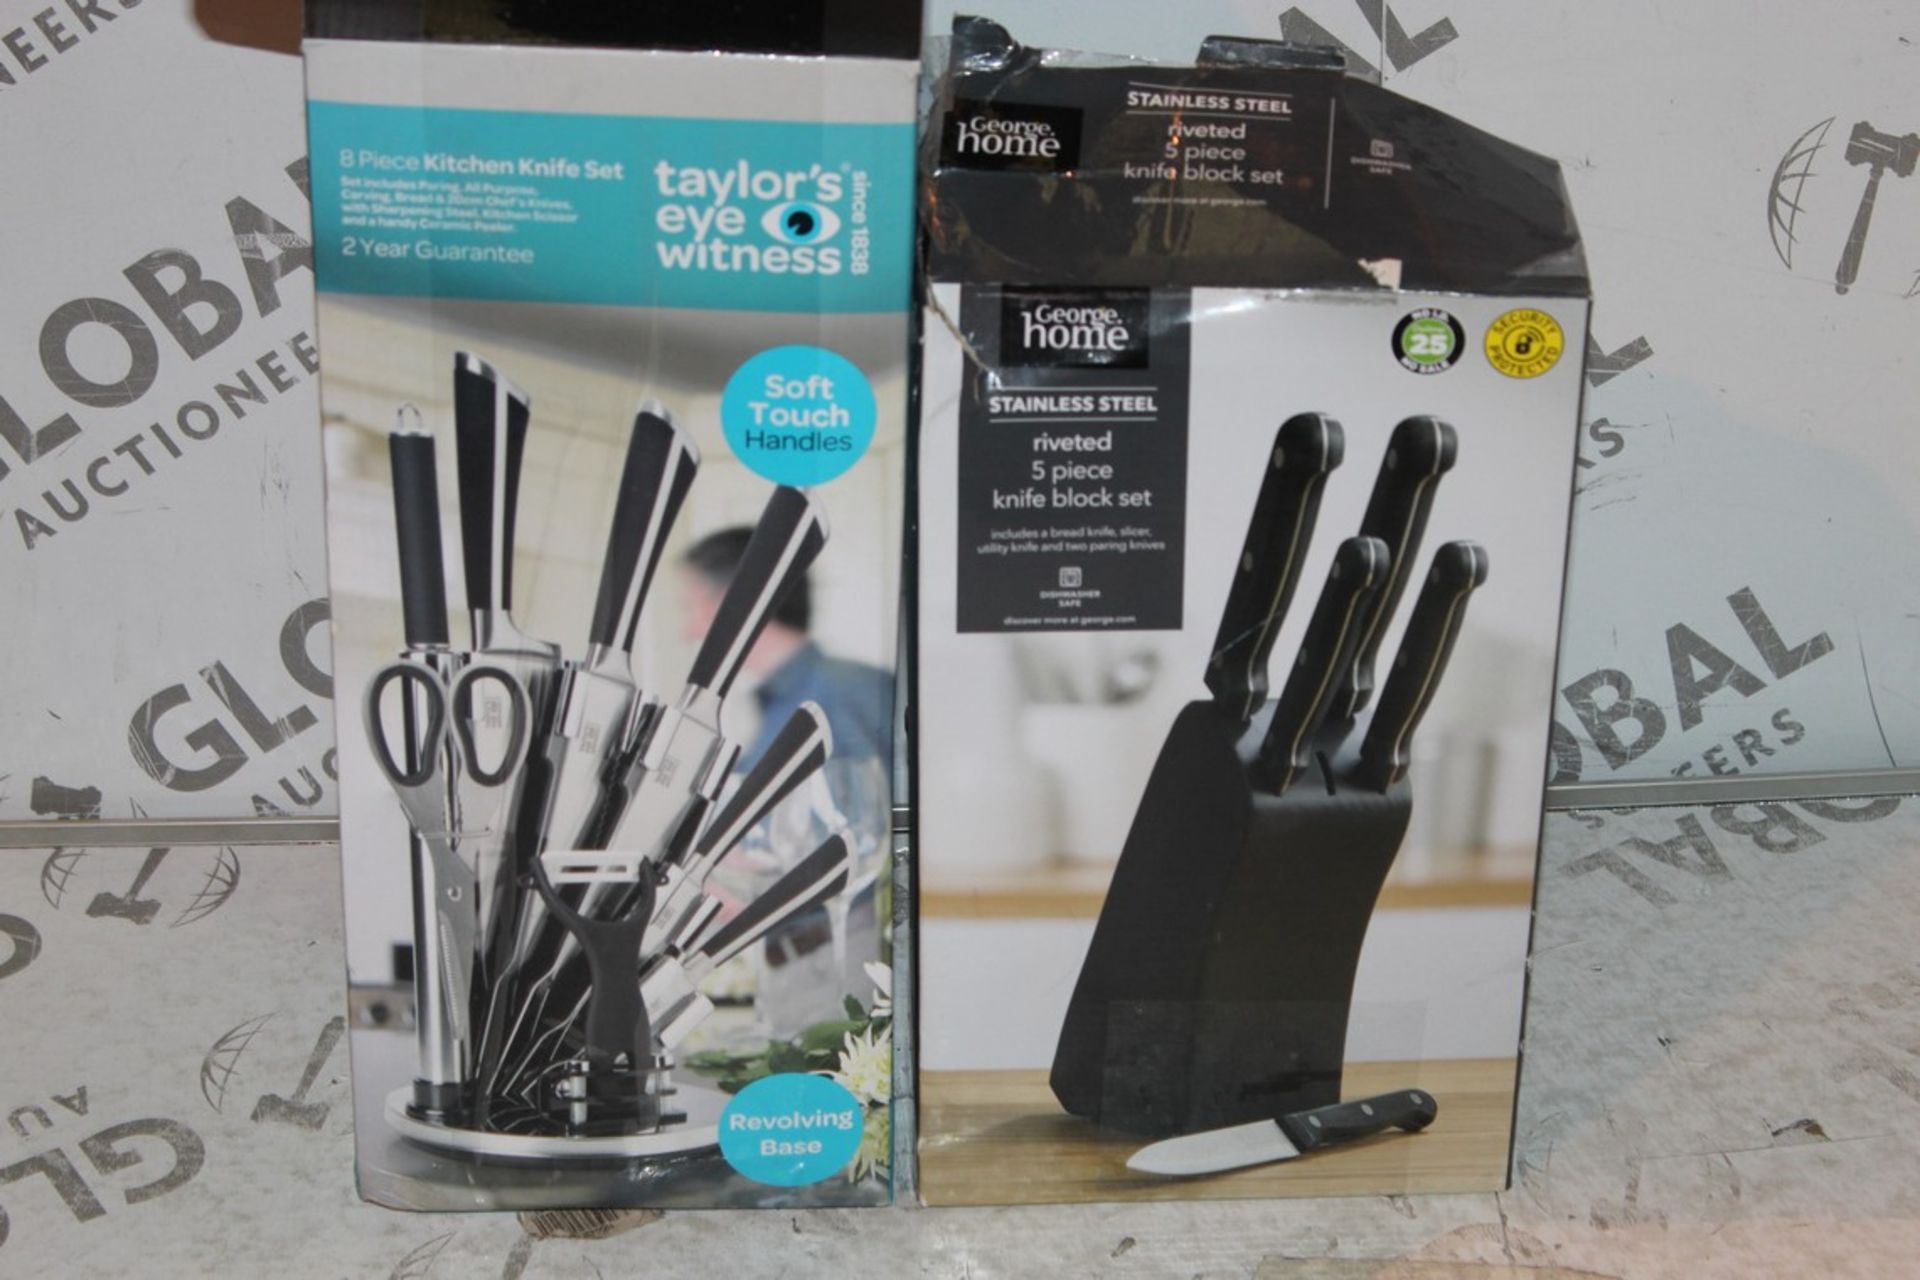 Lot to Contain 2 Assorted Taylors Eyewitness Knife Block and Stand and a Stainless Steel Knife Block